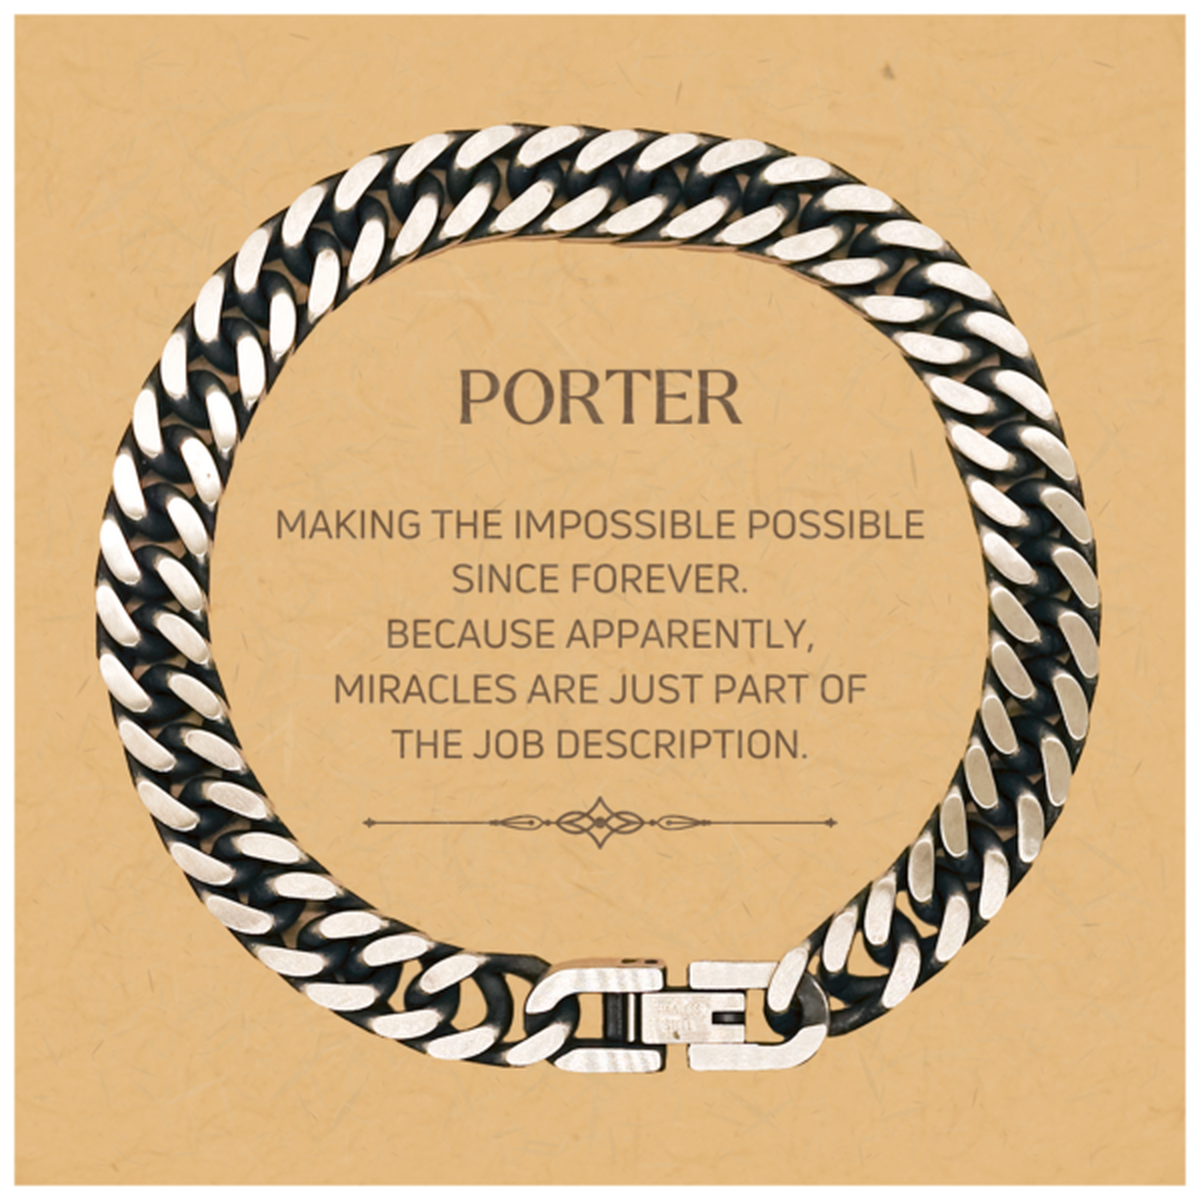 Funny Porter Gifts, Miracles are just part of the job description, Inspirational Birthday Christmas Cuban Link Chain Bracelet For Porter, Men, Women, Coworkers, Friends, Boss